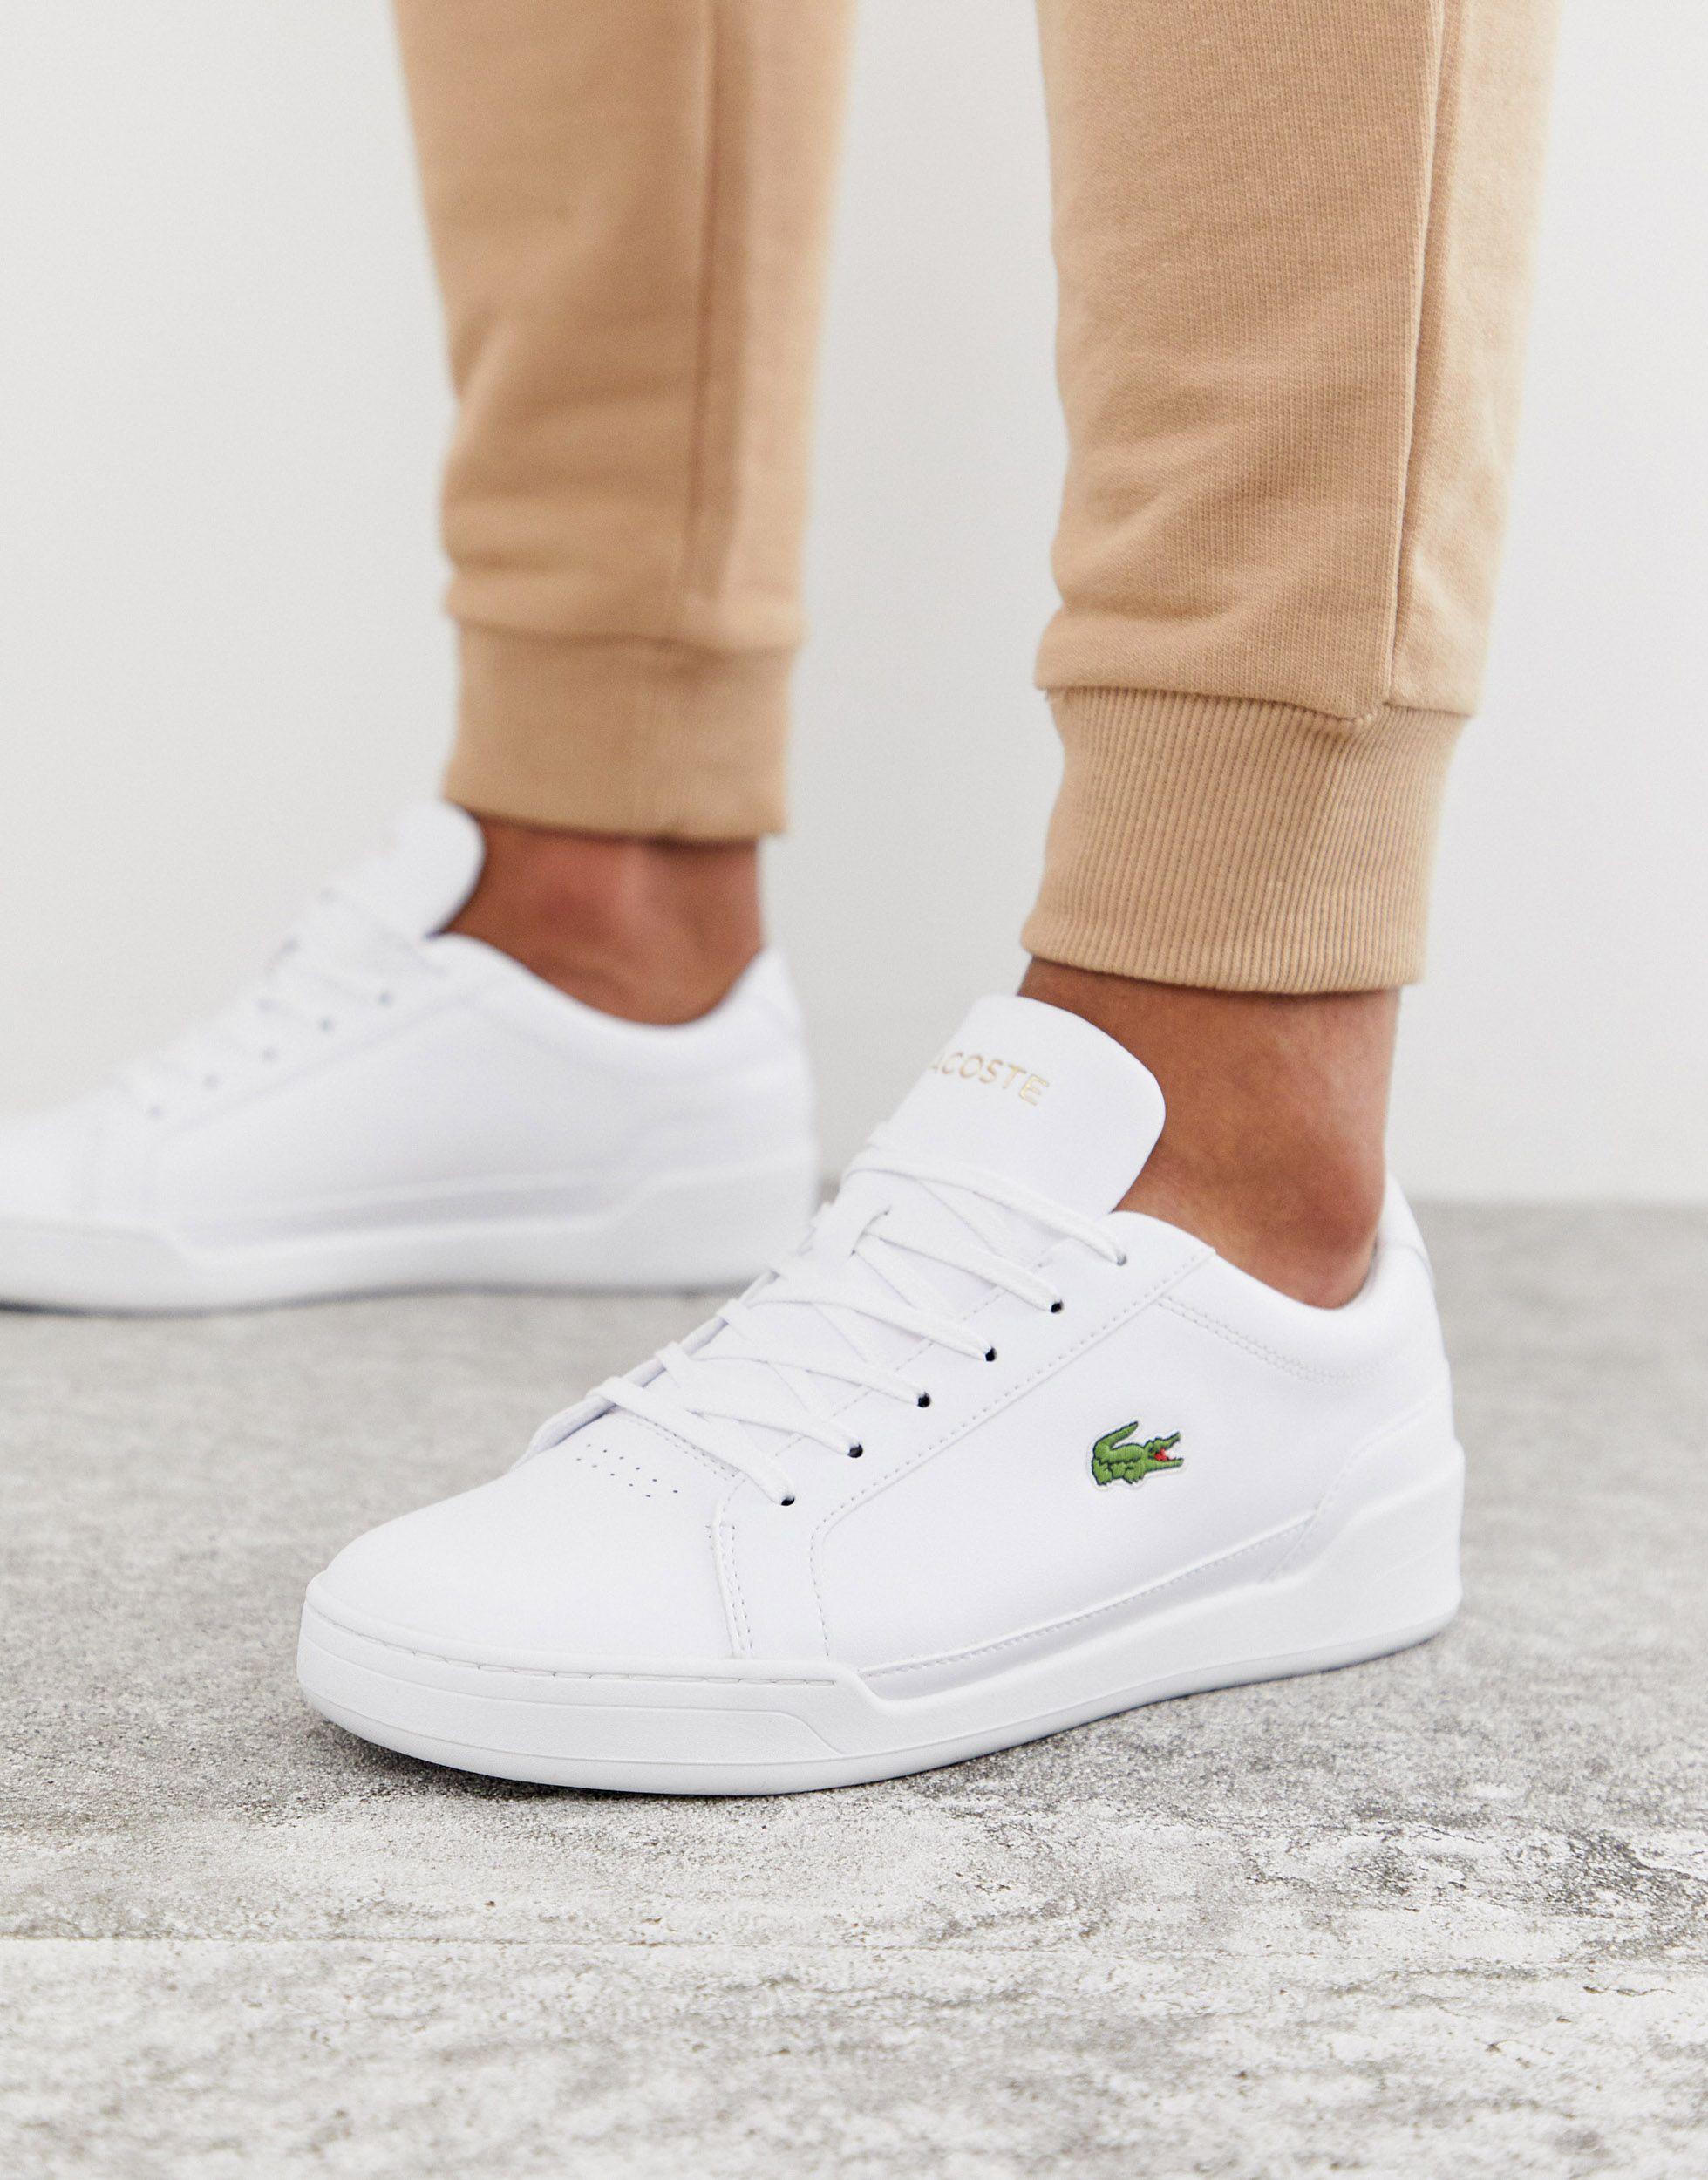 Leather Challenge Sneakers in White for Men - Lyst